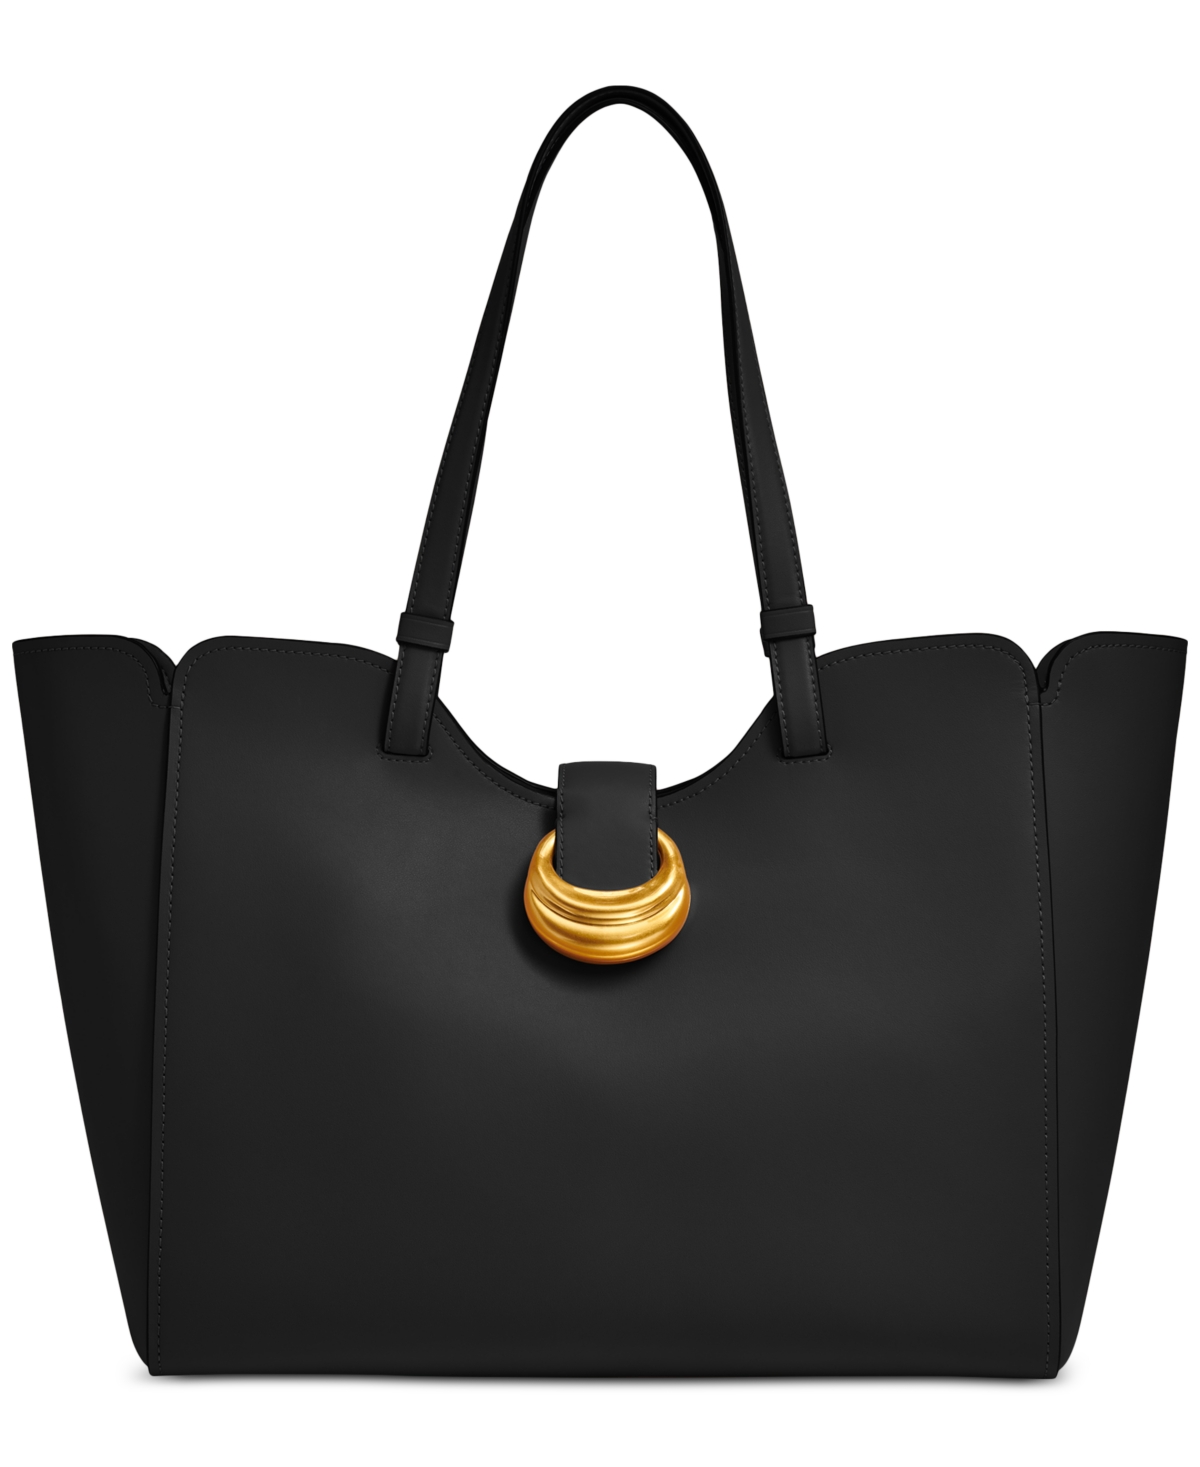 Valley Stream Large Buckle Tote - Black/gold